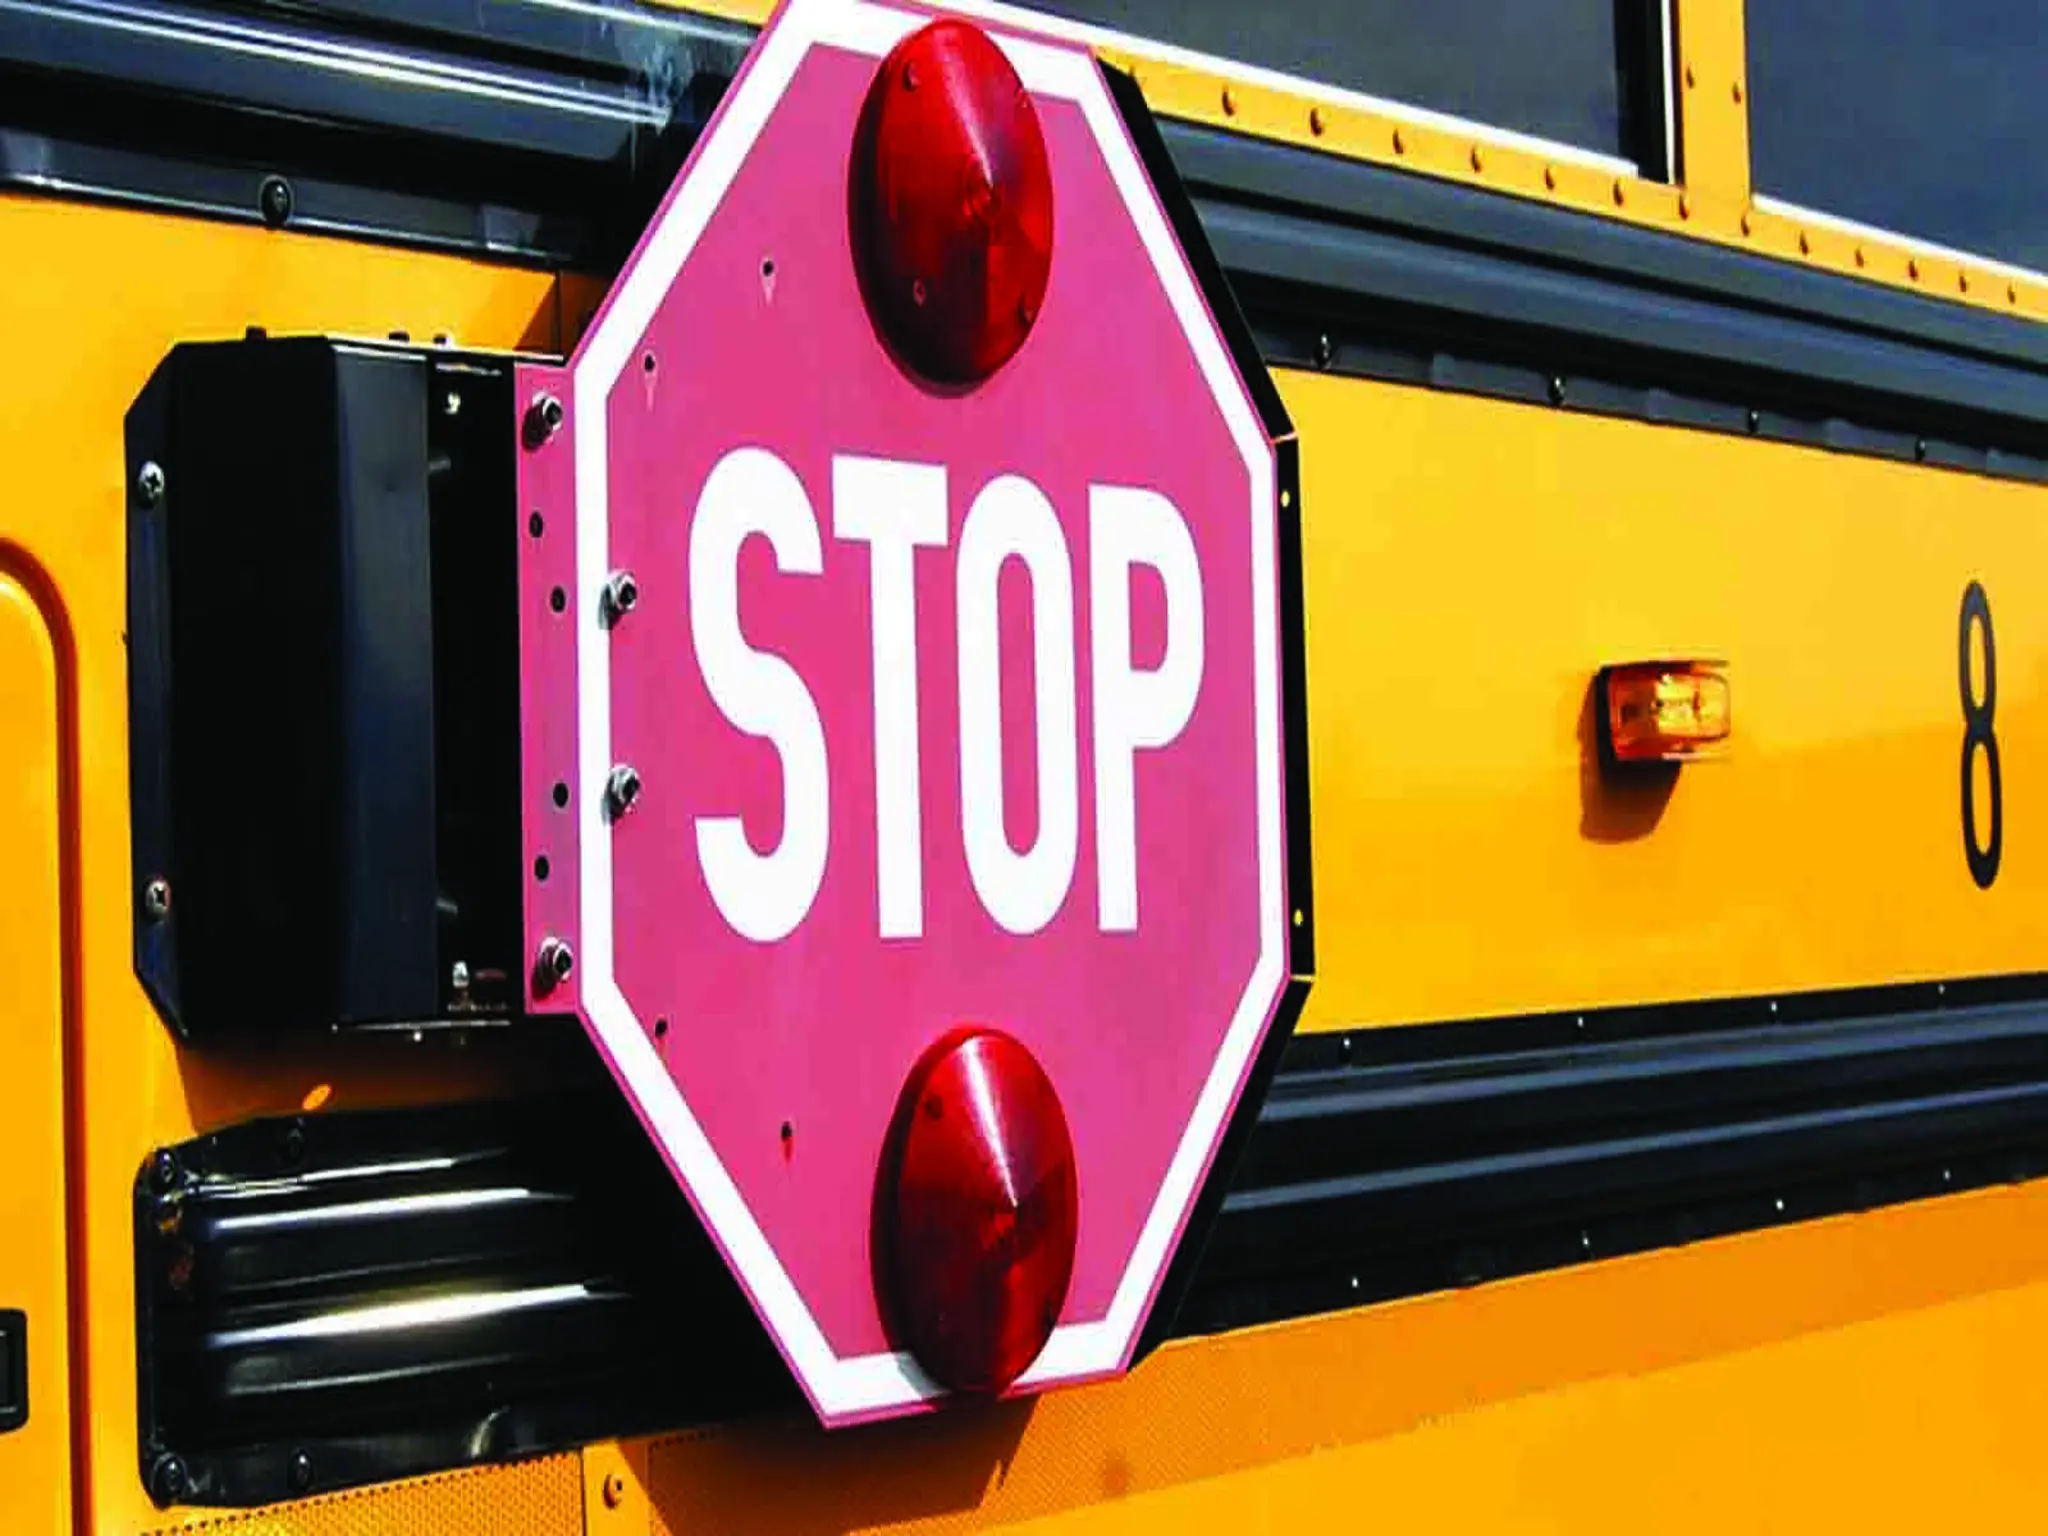 The UAE issues a traffic fine of 1,000 dirhams for not stopping for school buses